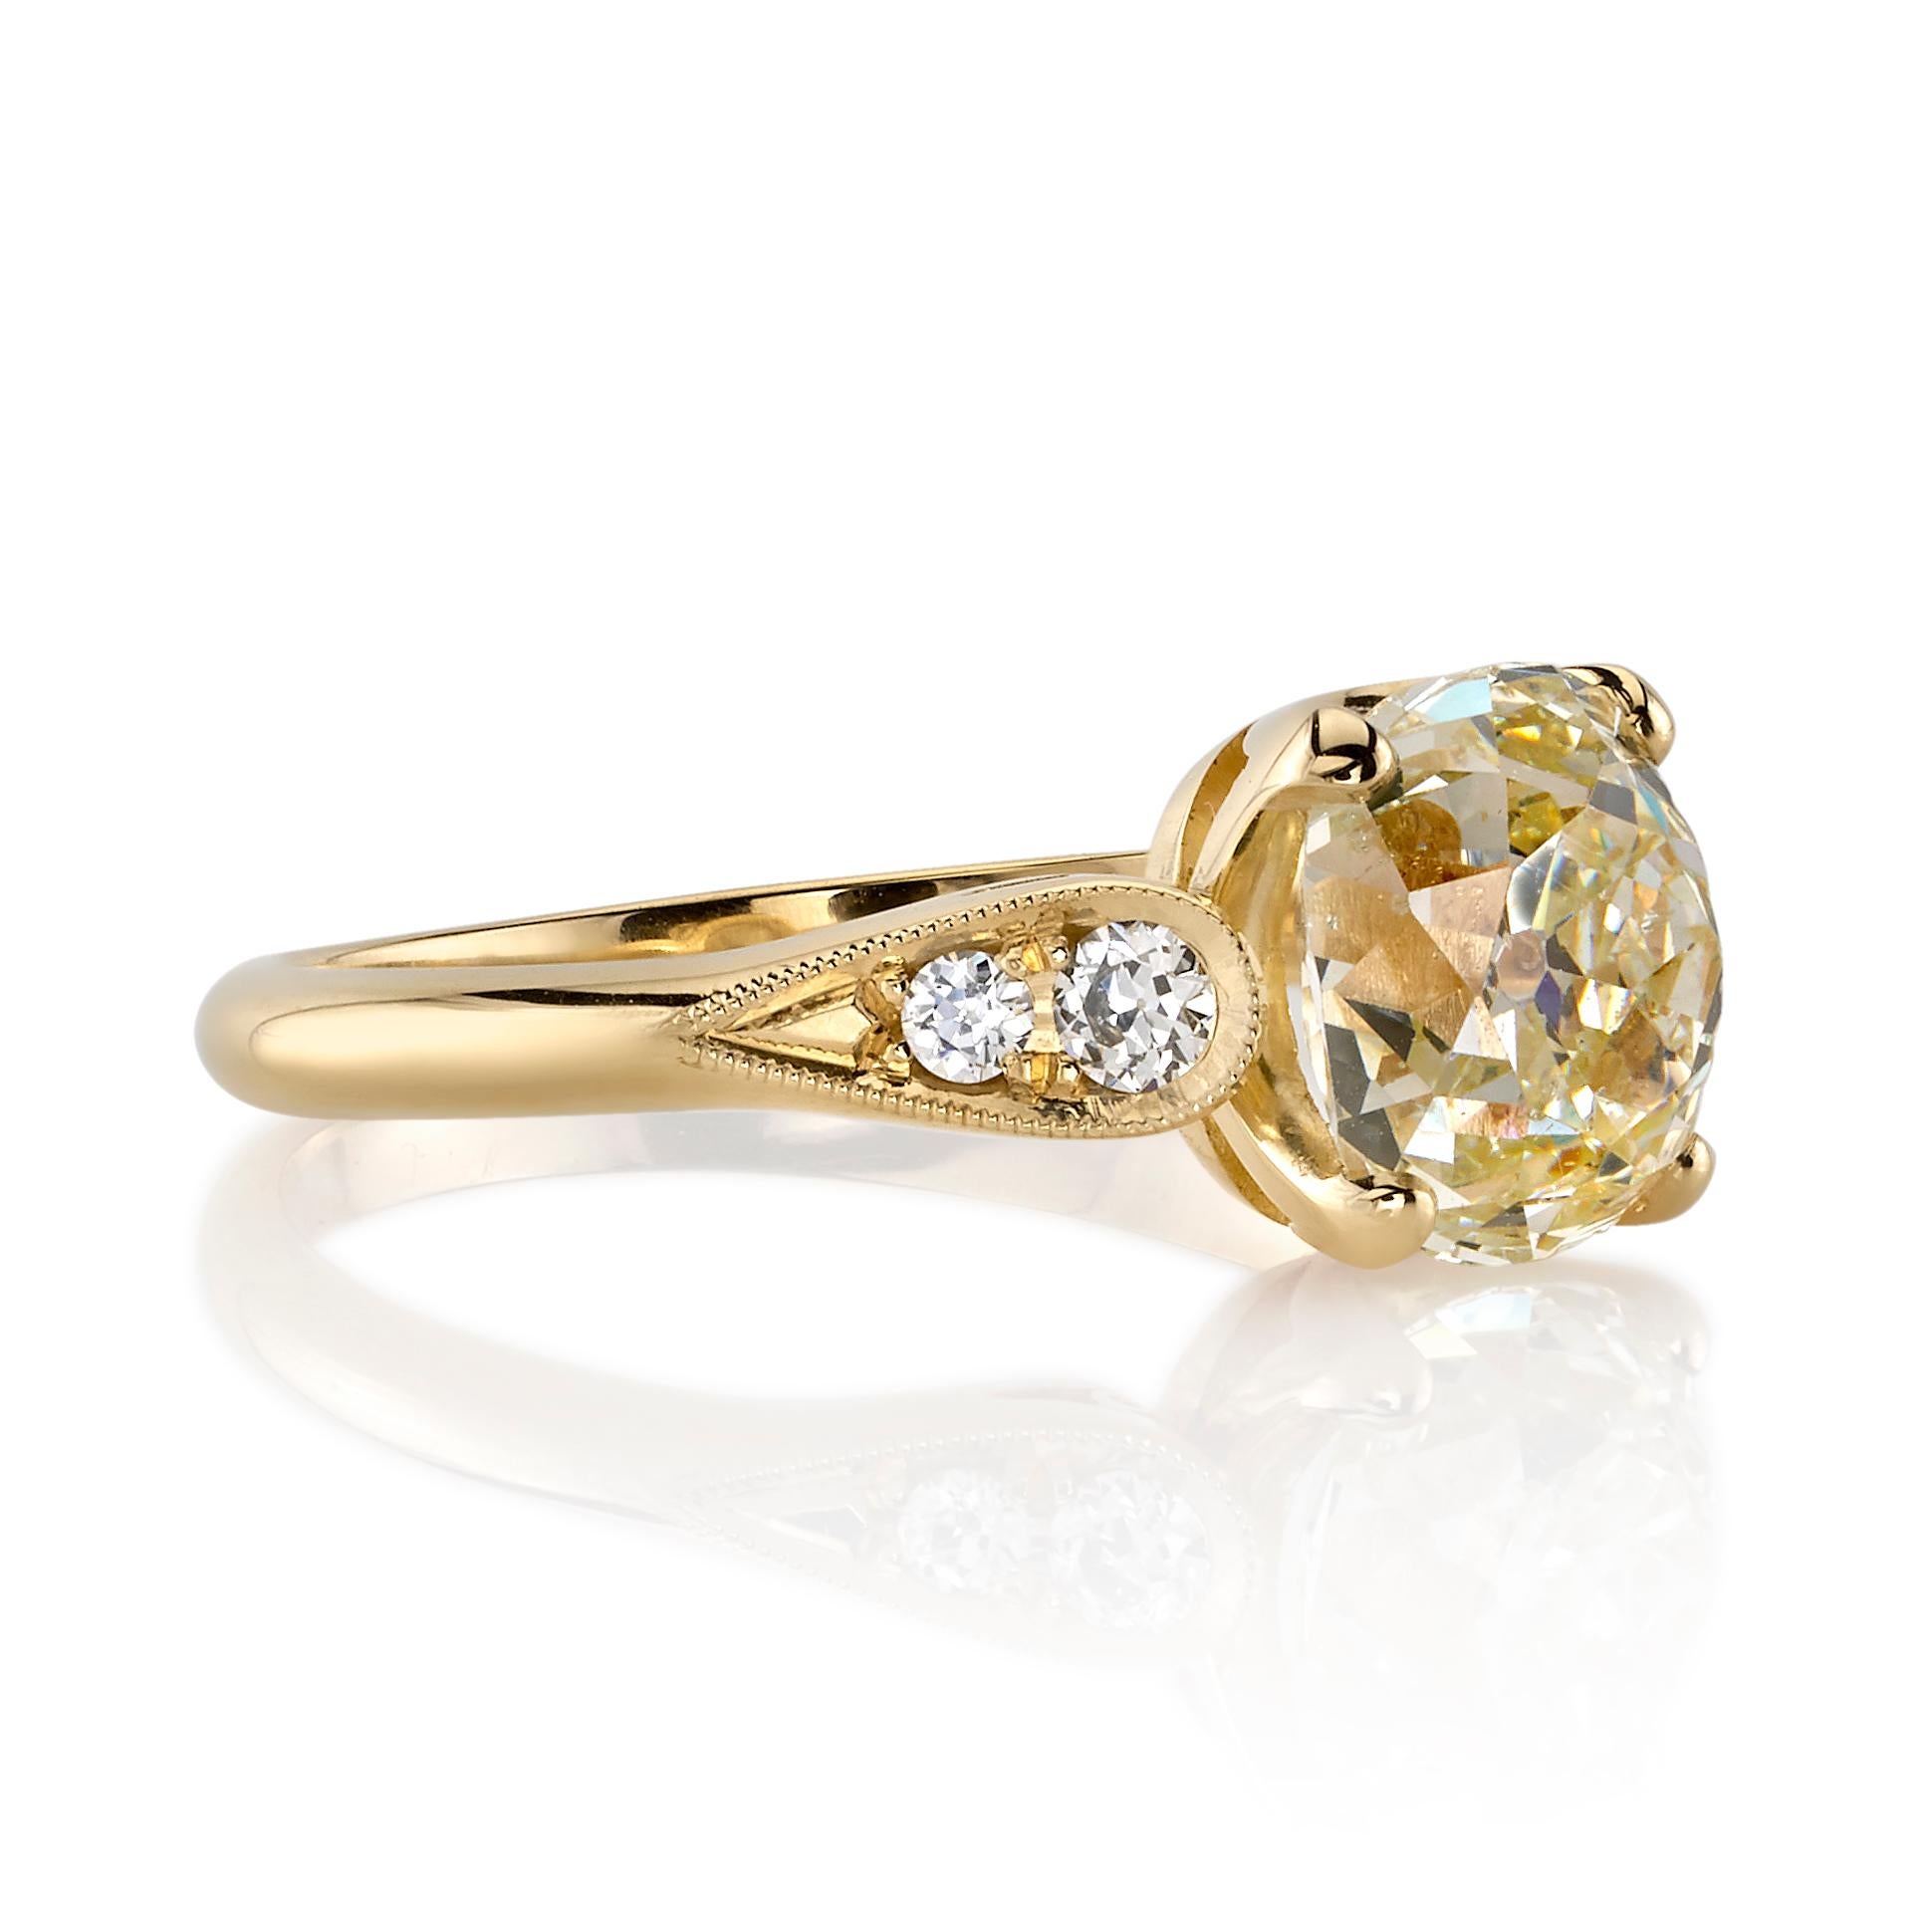 2.20ctw O-P/SI2 GIA certified vintage Cushion cut diamond with 0.14ctw old European cut accent diamonds set in a handcrafted 18K yellow gold mounting.

Ring is a size 6 and can be sized to fit.